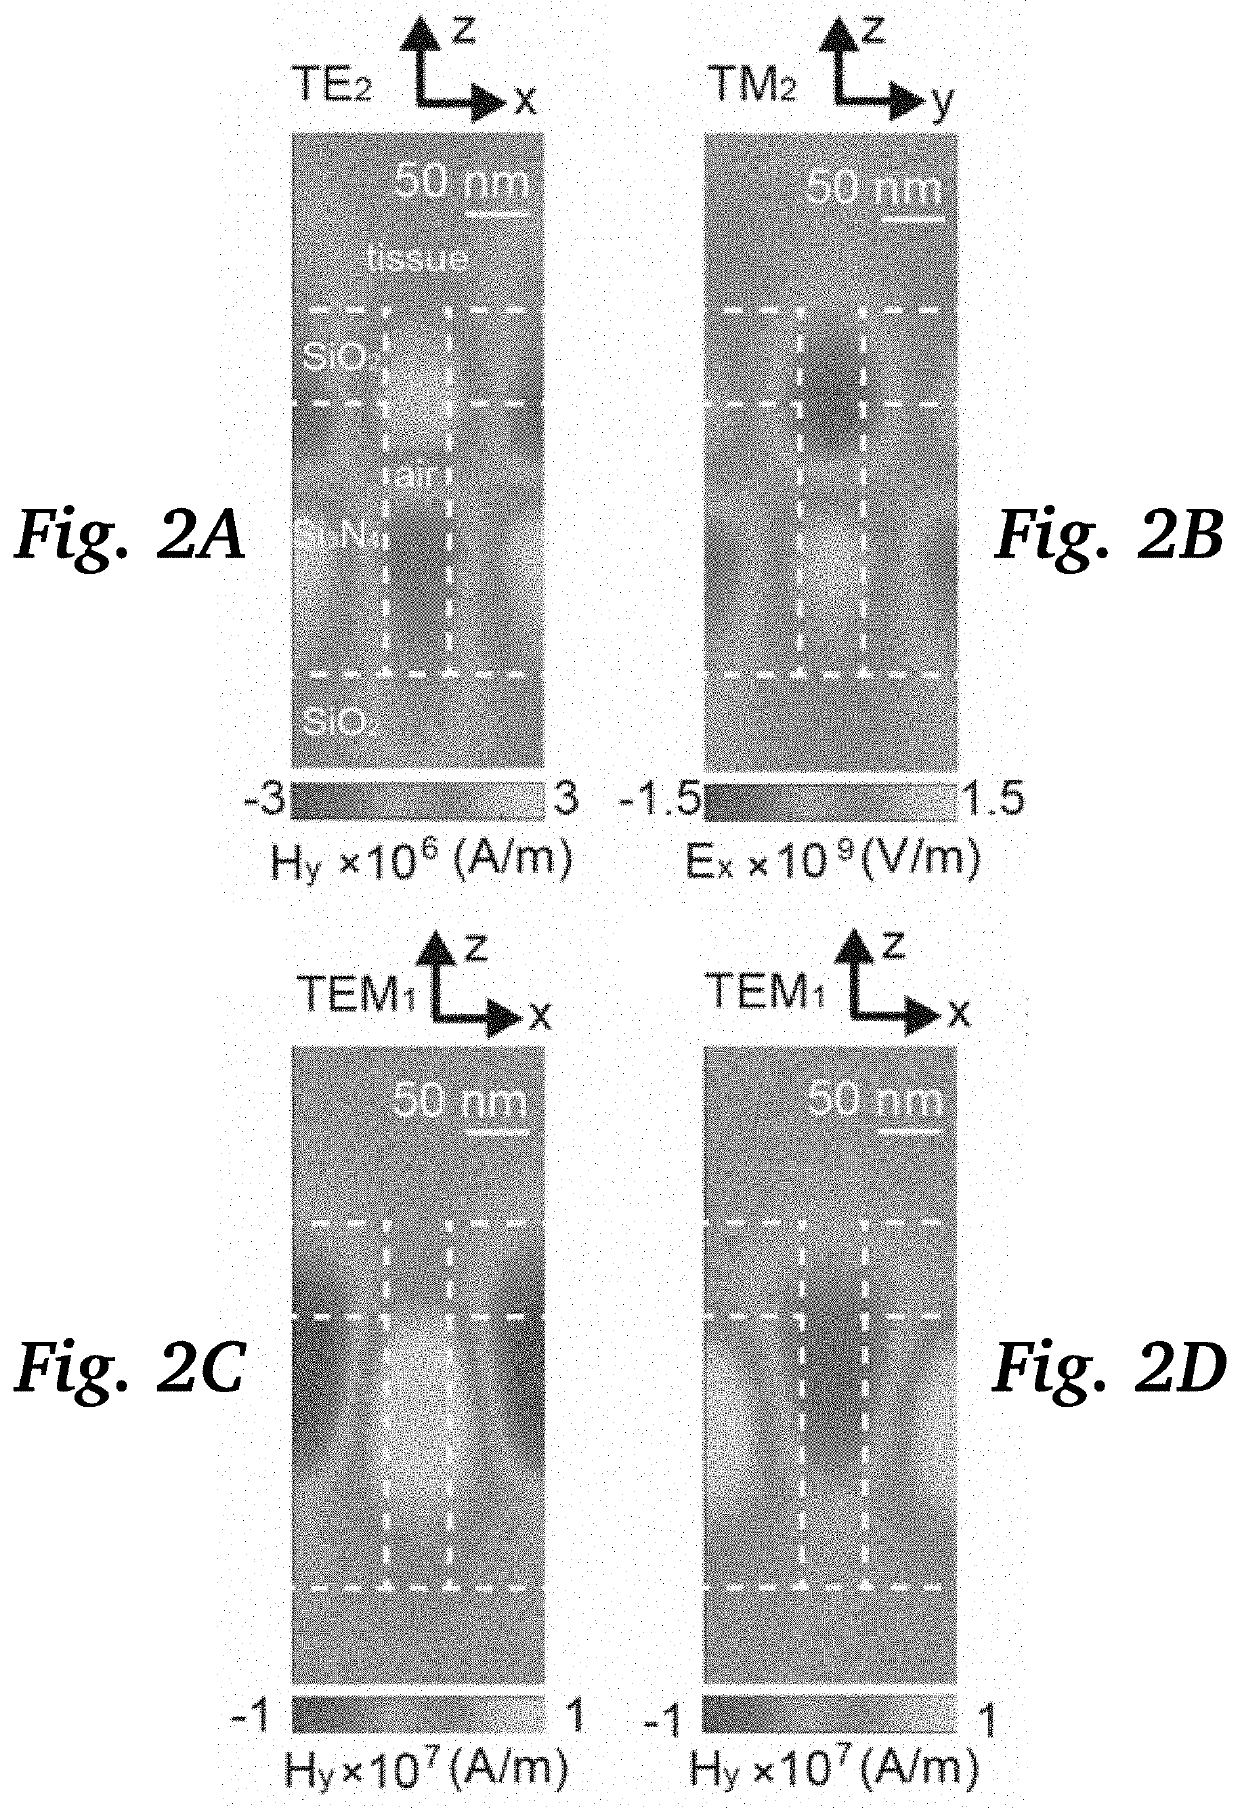 Metasurfaces for optical detection of tissue and fibrous material anisotropy